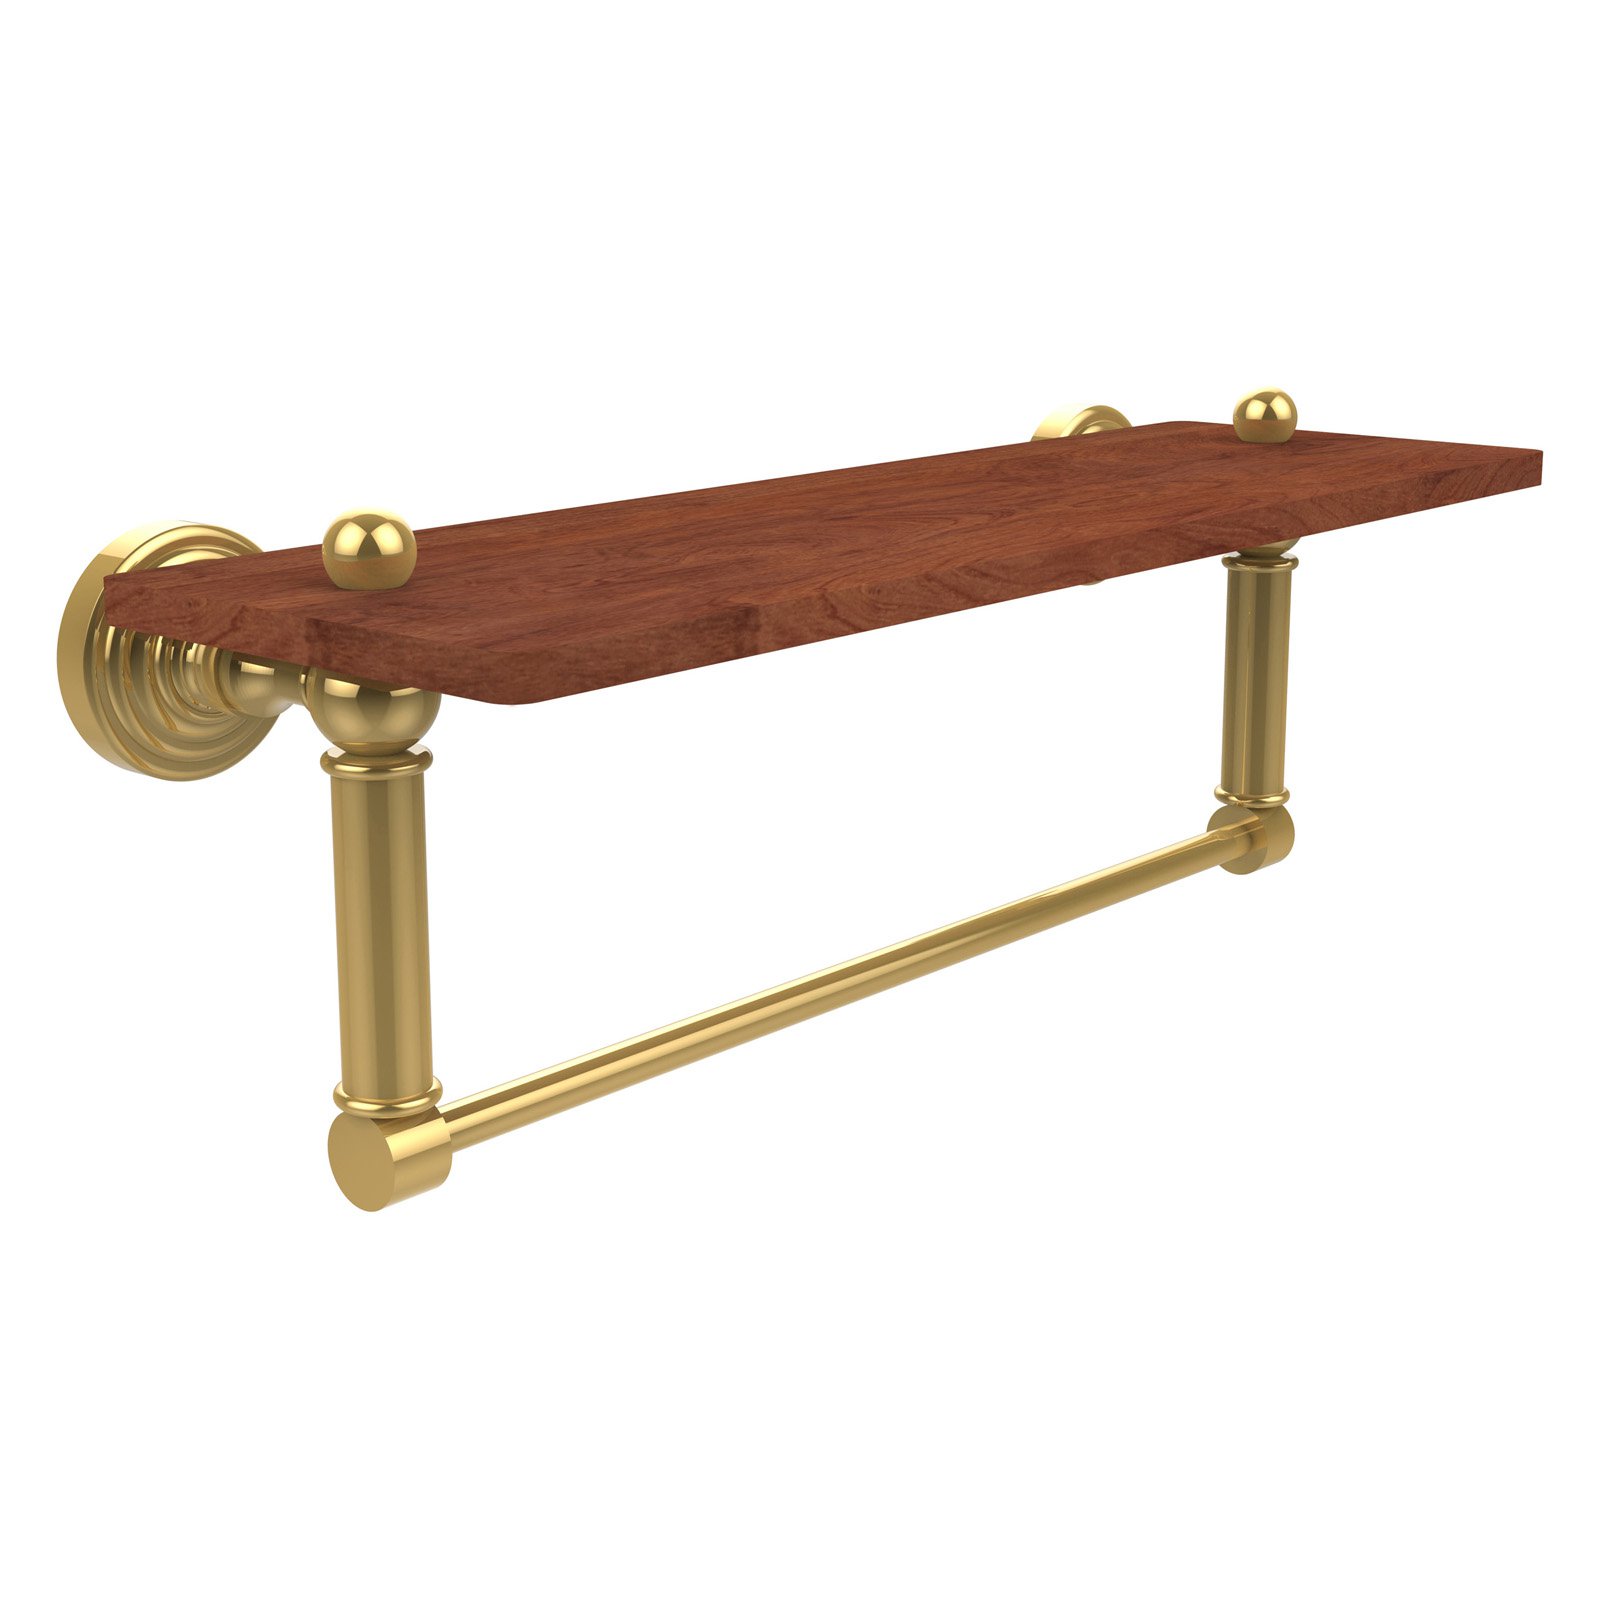 Waverly Place Collection Solid IPE Ironwood Shelf with Integrated Towel Bar - Satin Brass / 22 Inch - image 2 of 2